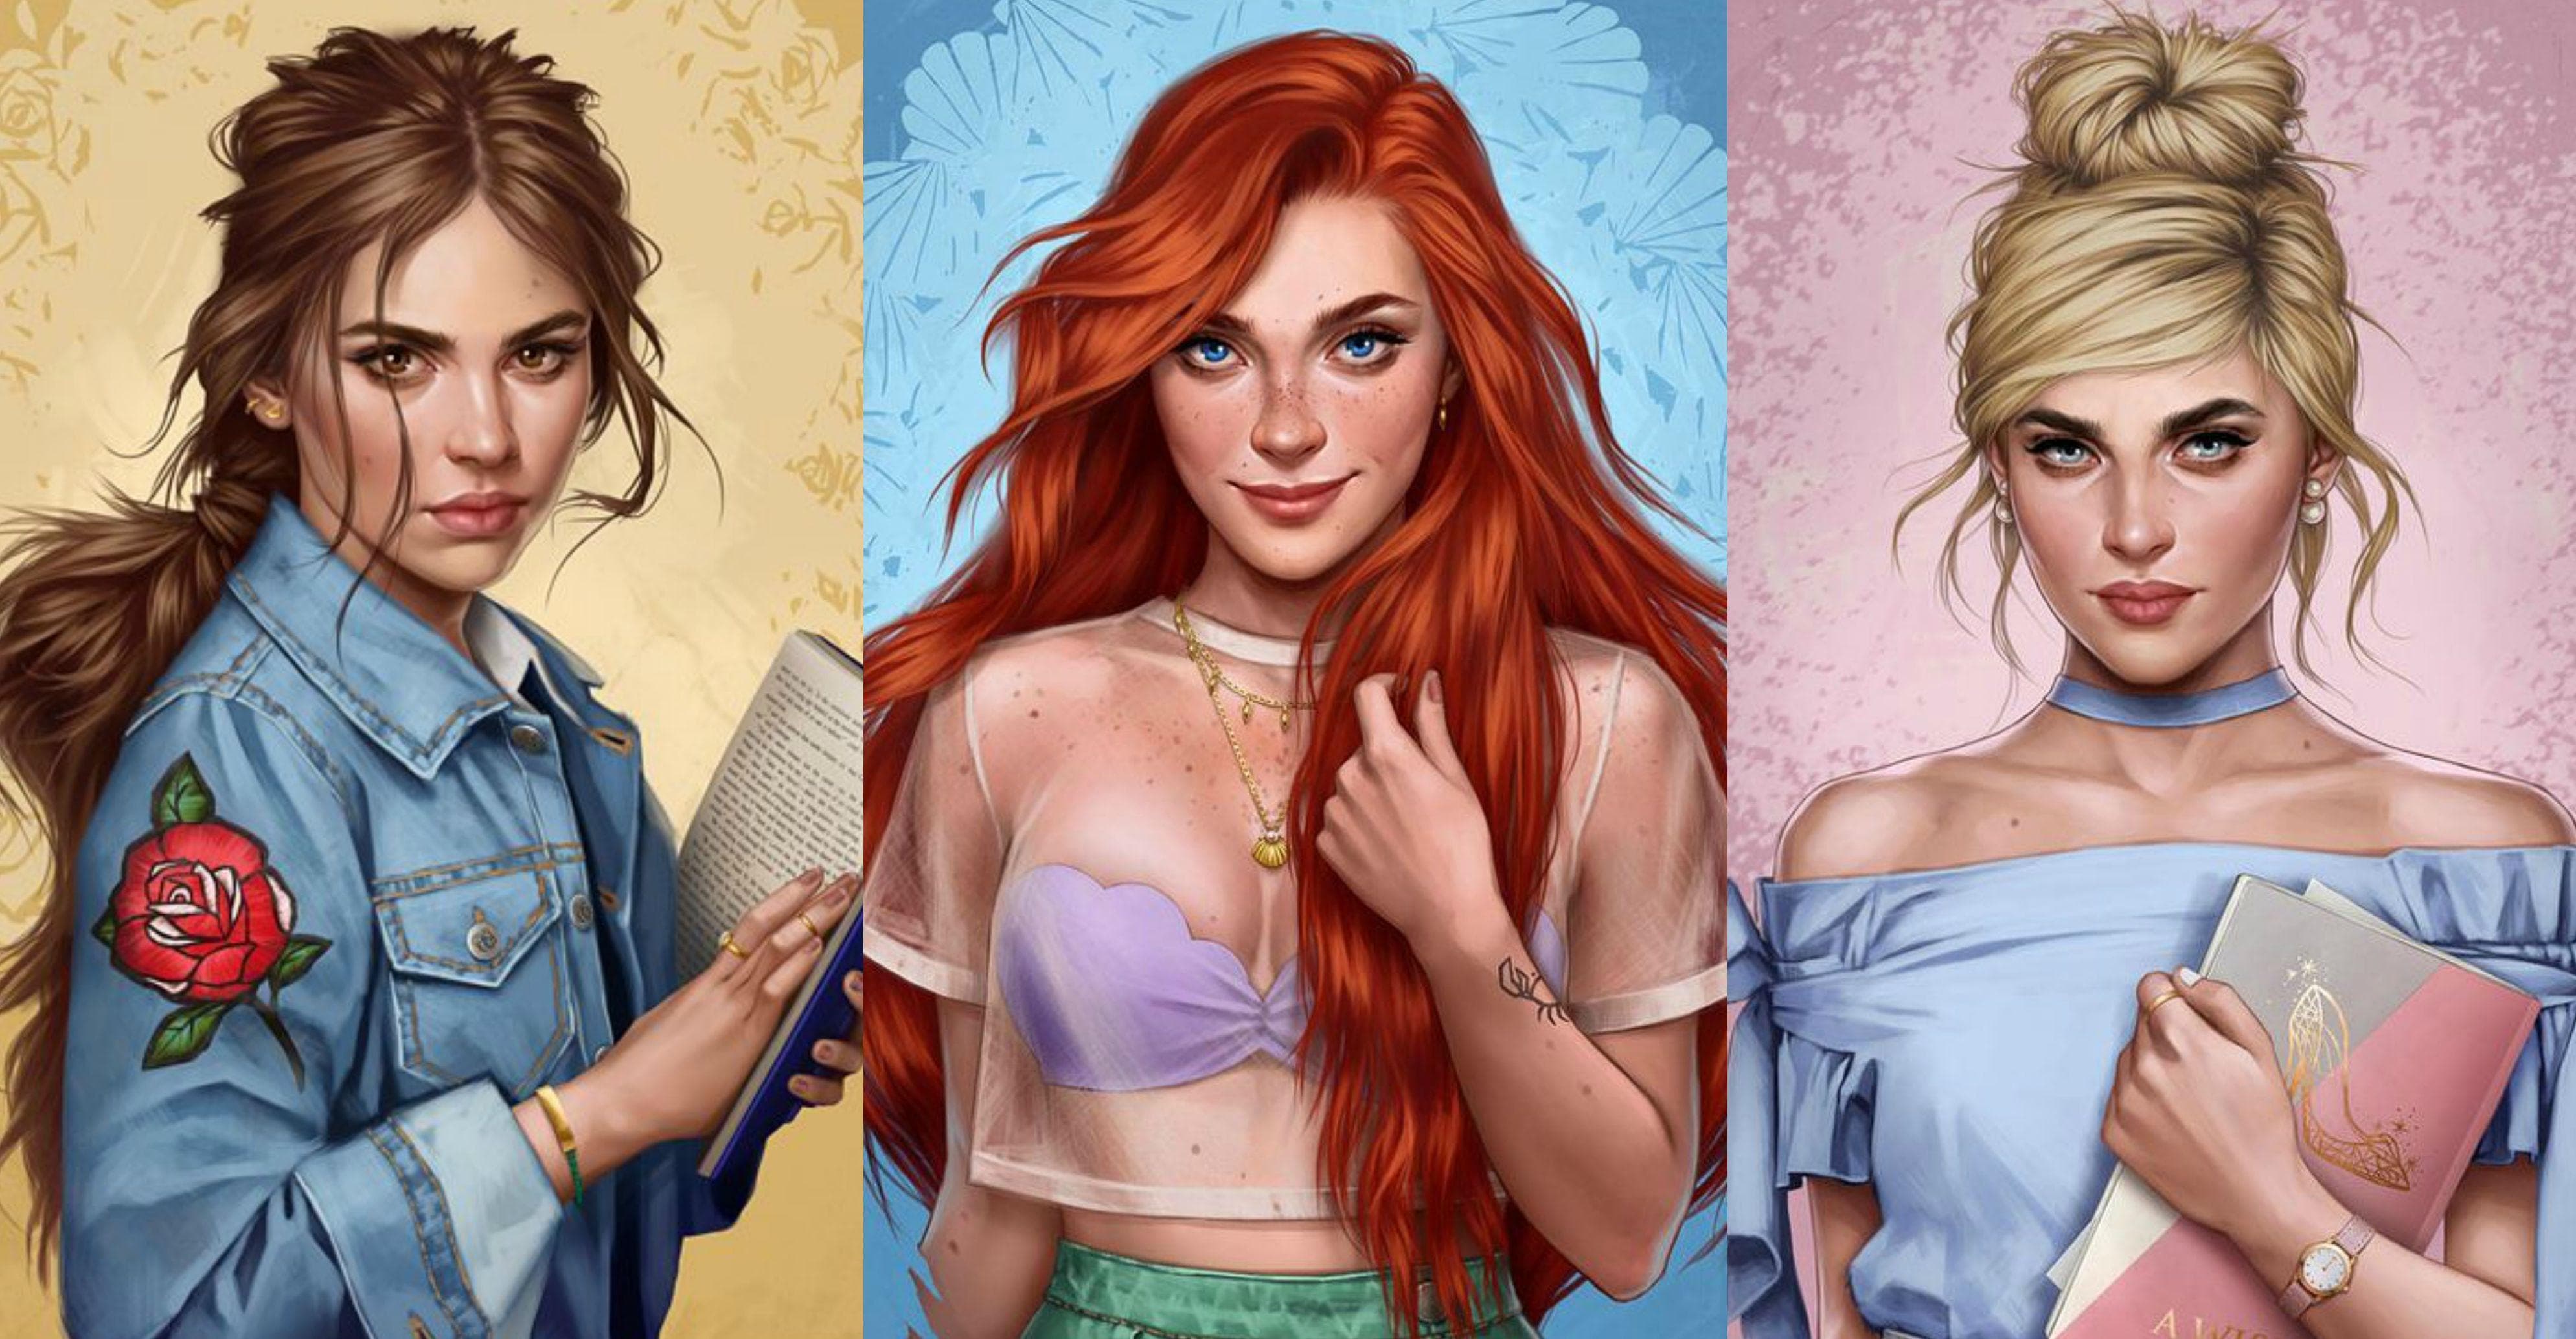 This Artist Reimagines Your Favorite Disney Princesses As Modern Day Women